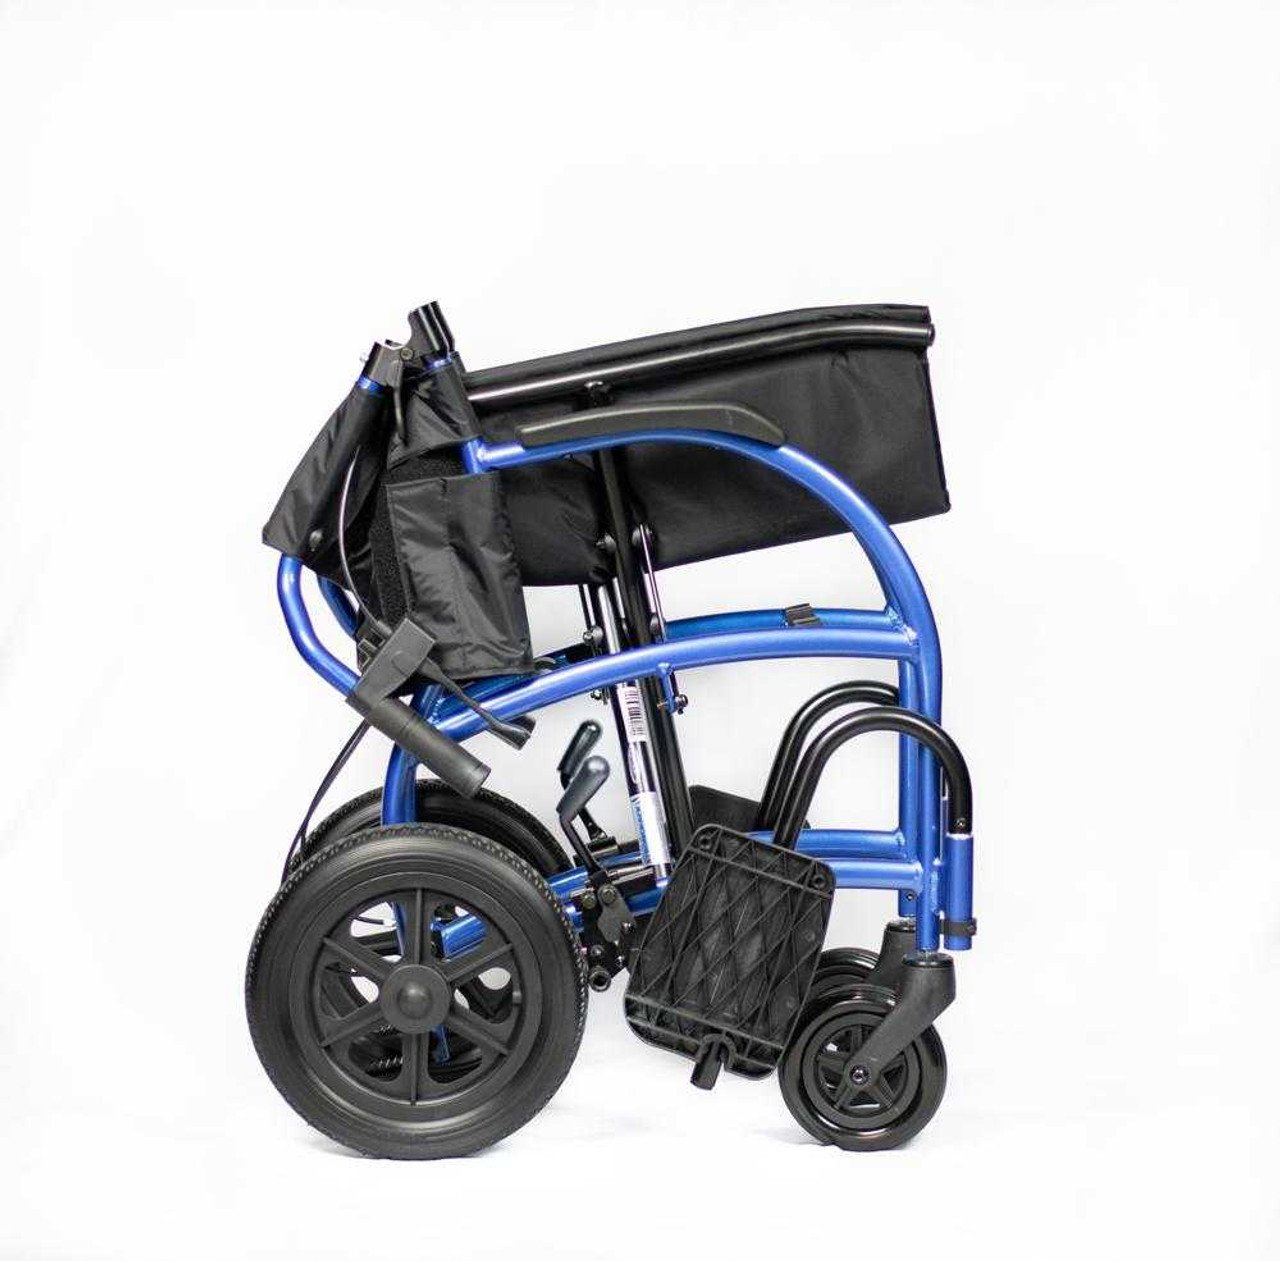 Strongback Transport Chair with Attendant Brake Strongback In Stock CVI Medical